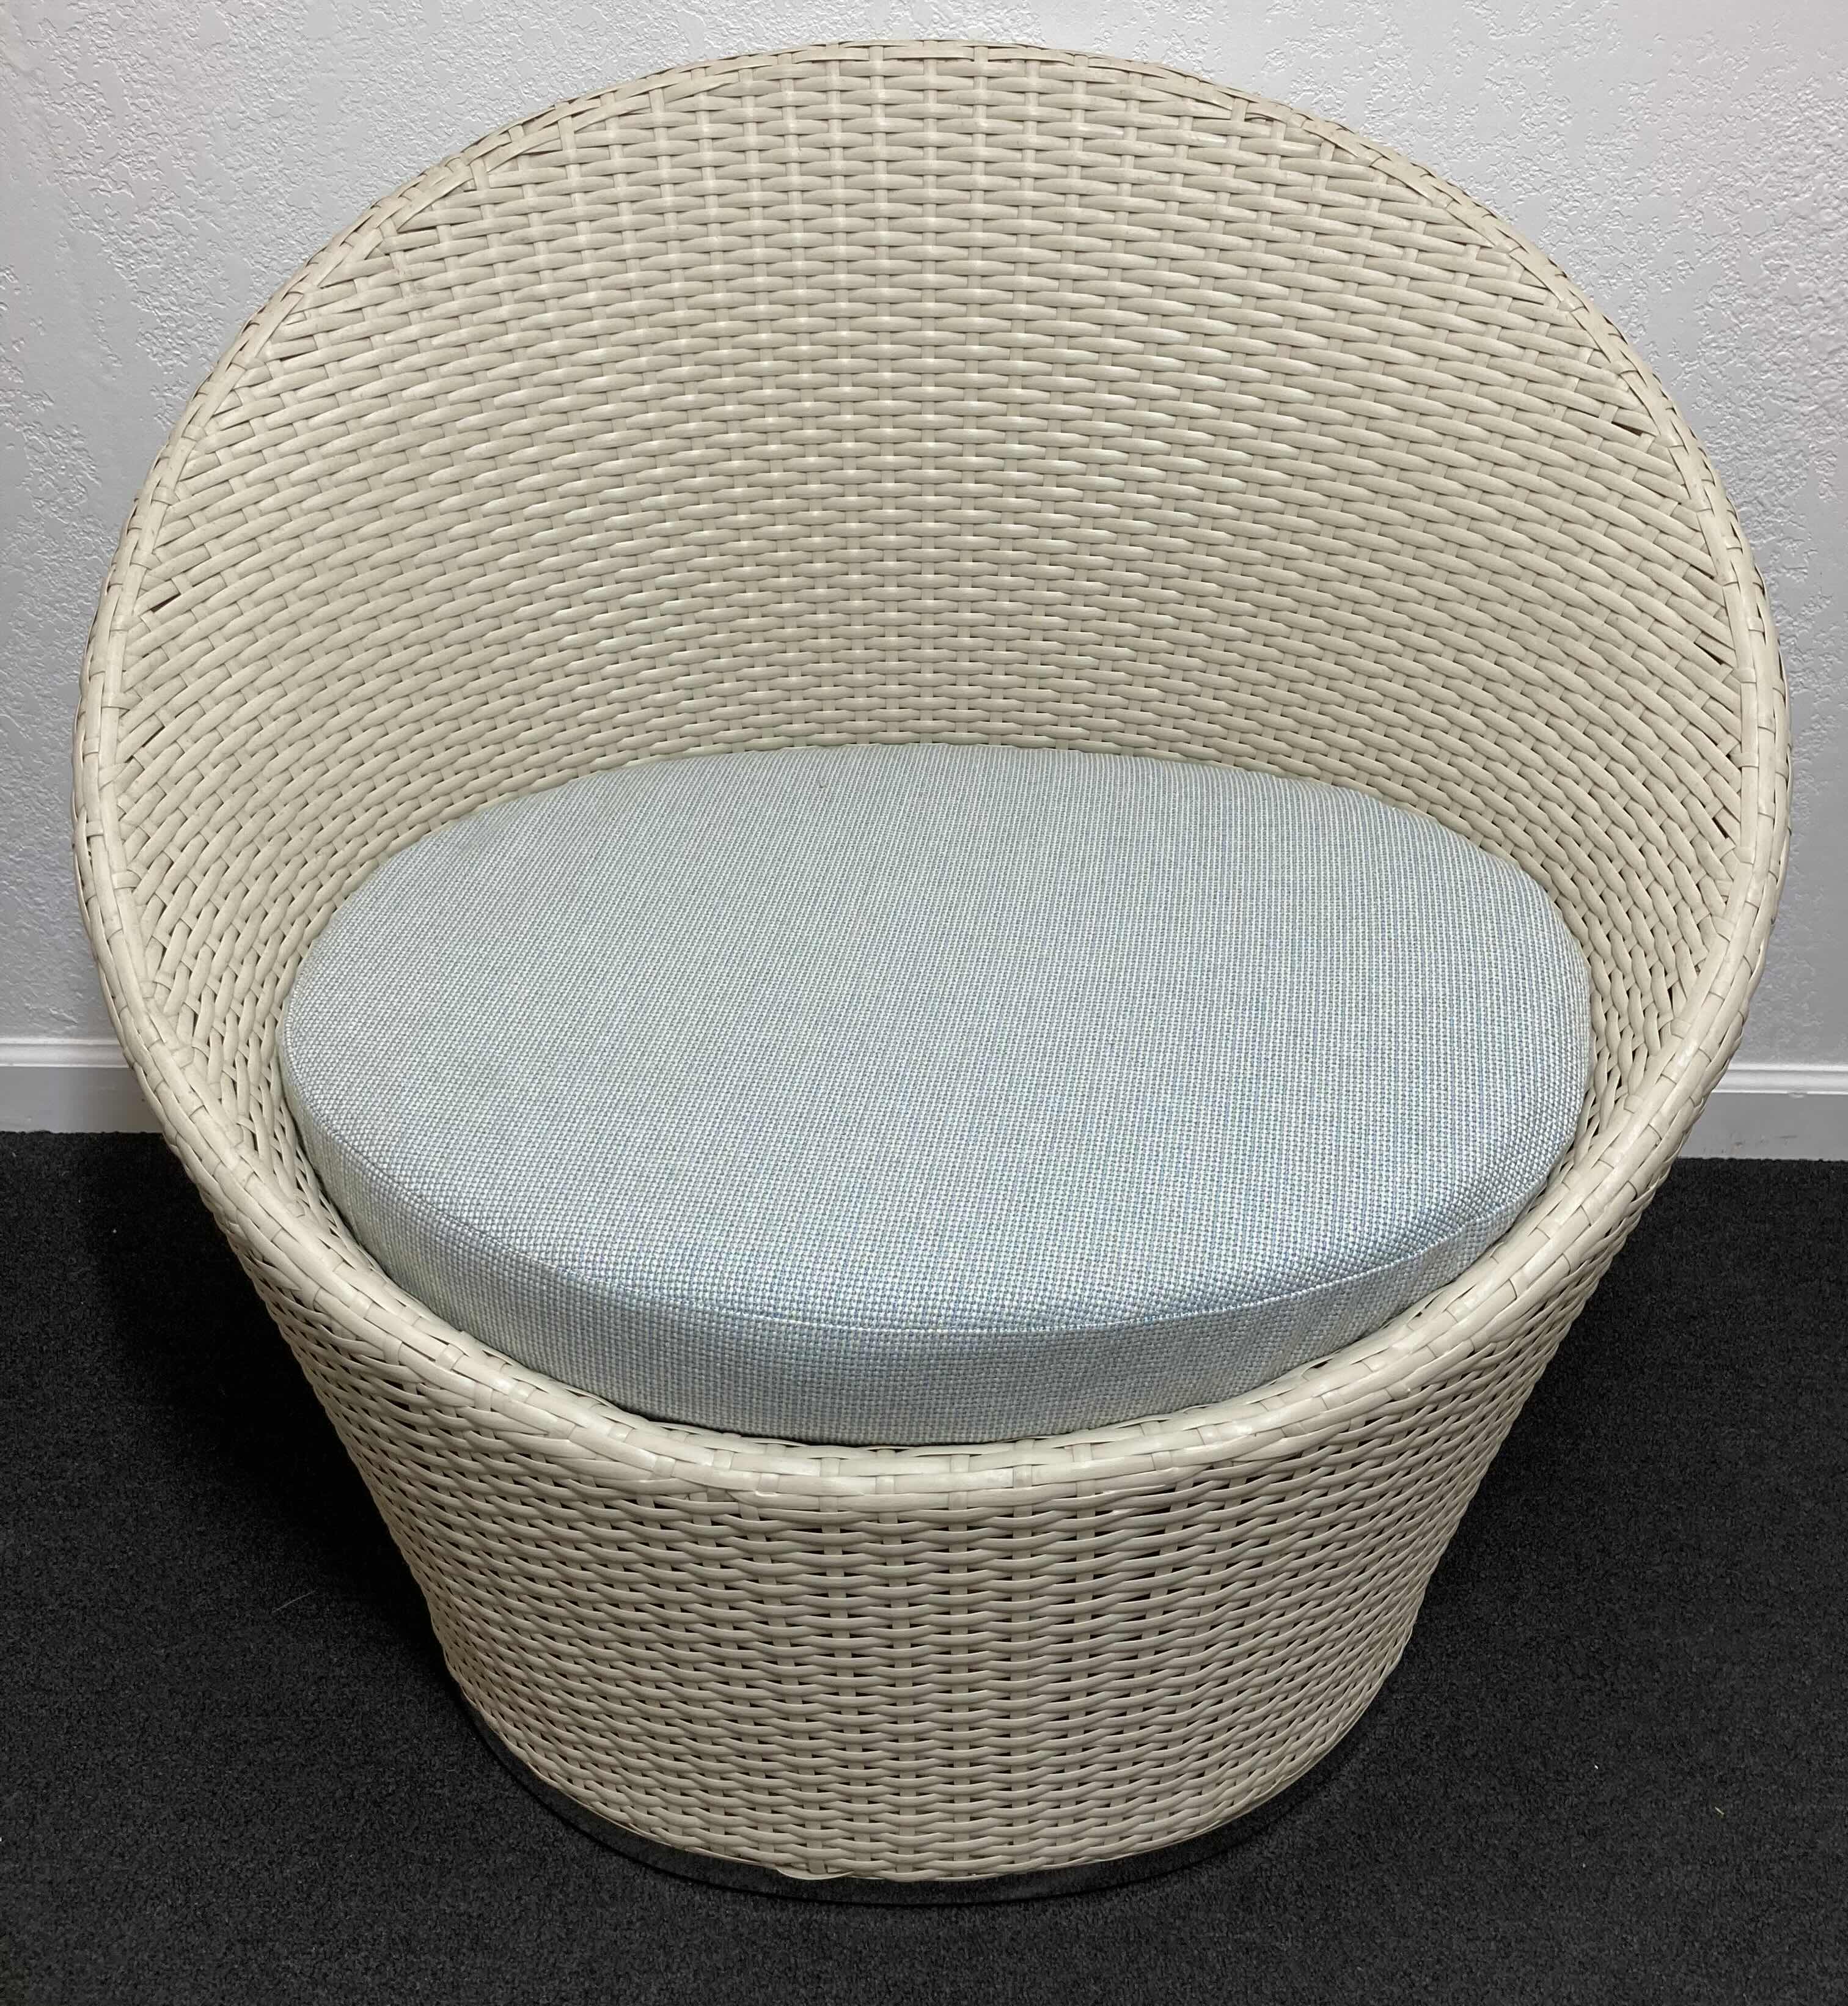 Photo 2 of SILHOUETTE OUTDOOR FURNITURE OFF-WHITE LUXURY WOVEN WICKER LOUNGE CHAIR W SEAT CUSHION & CHROME FINISH BASE 33” X 24” H28.5”